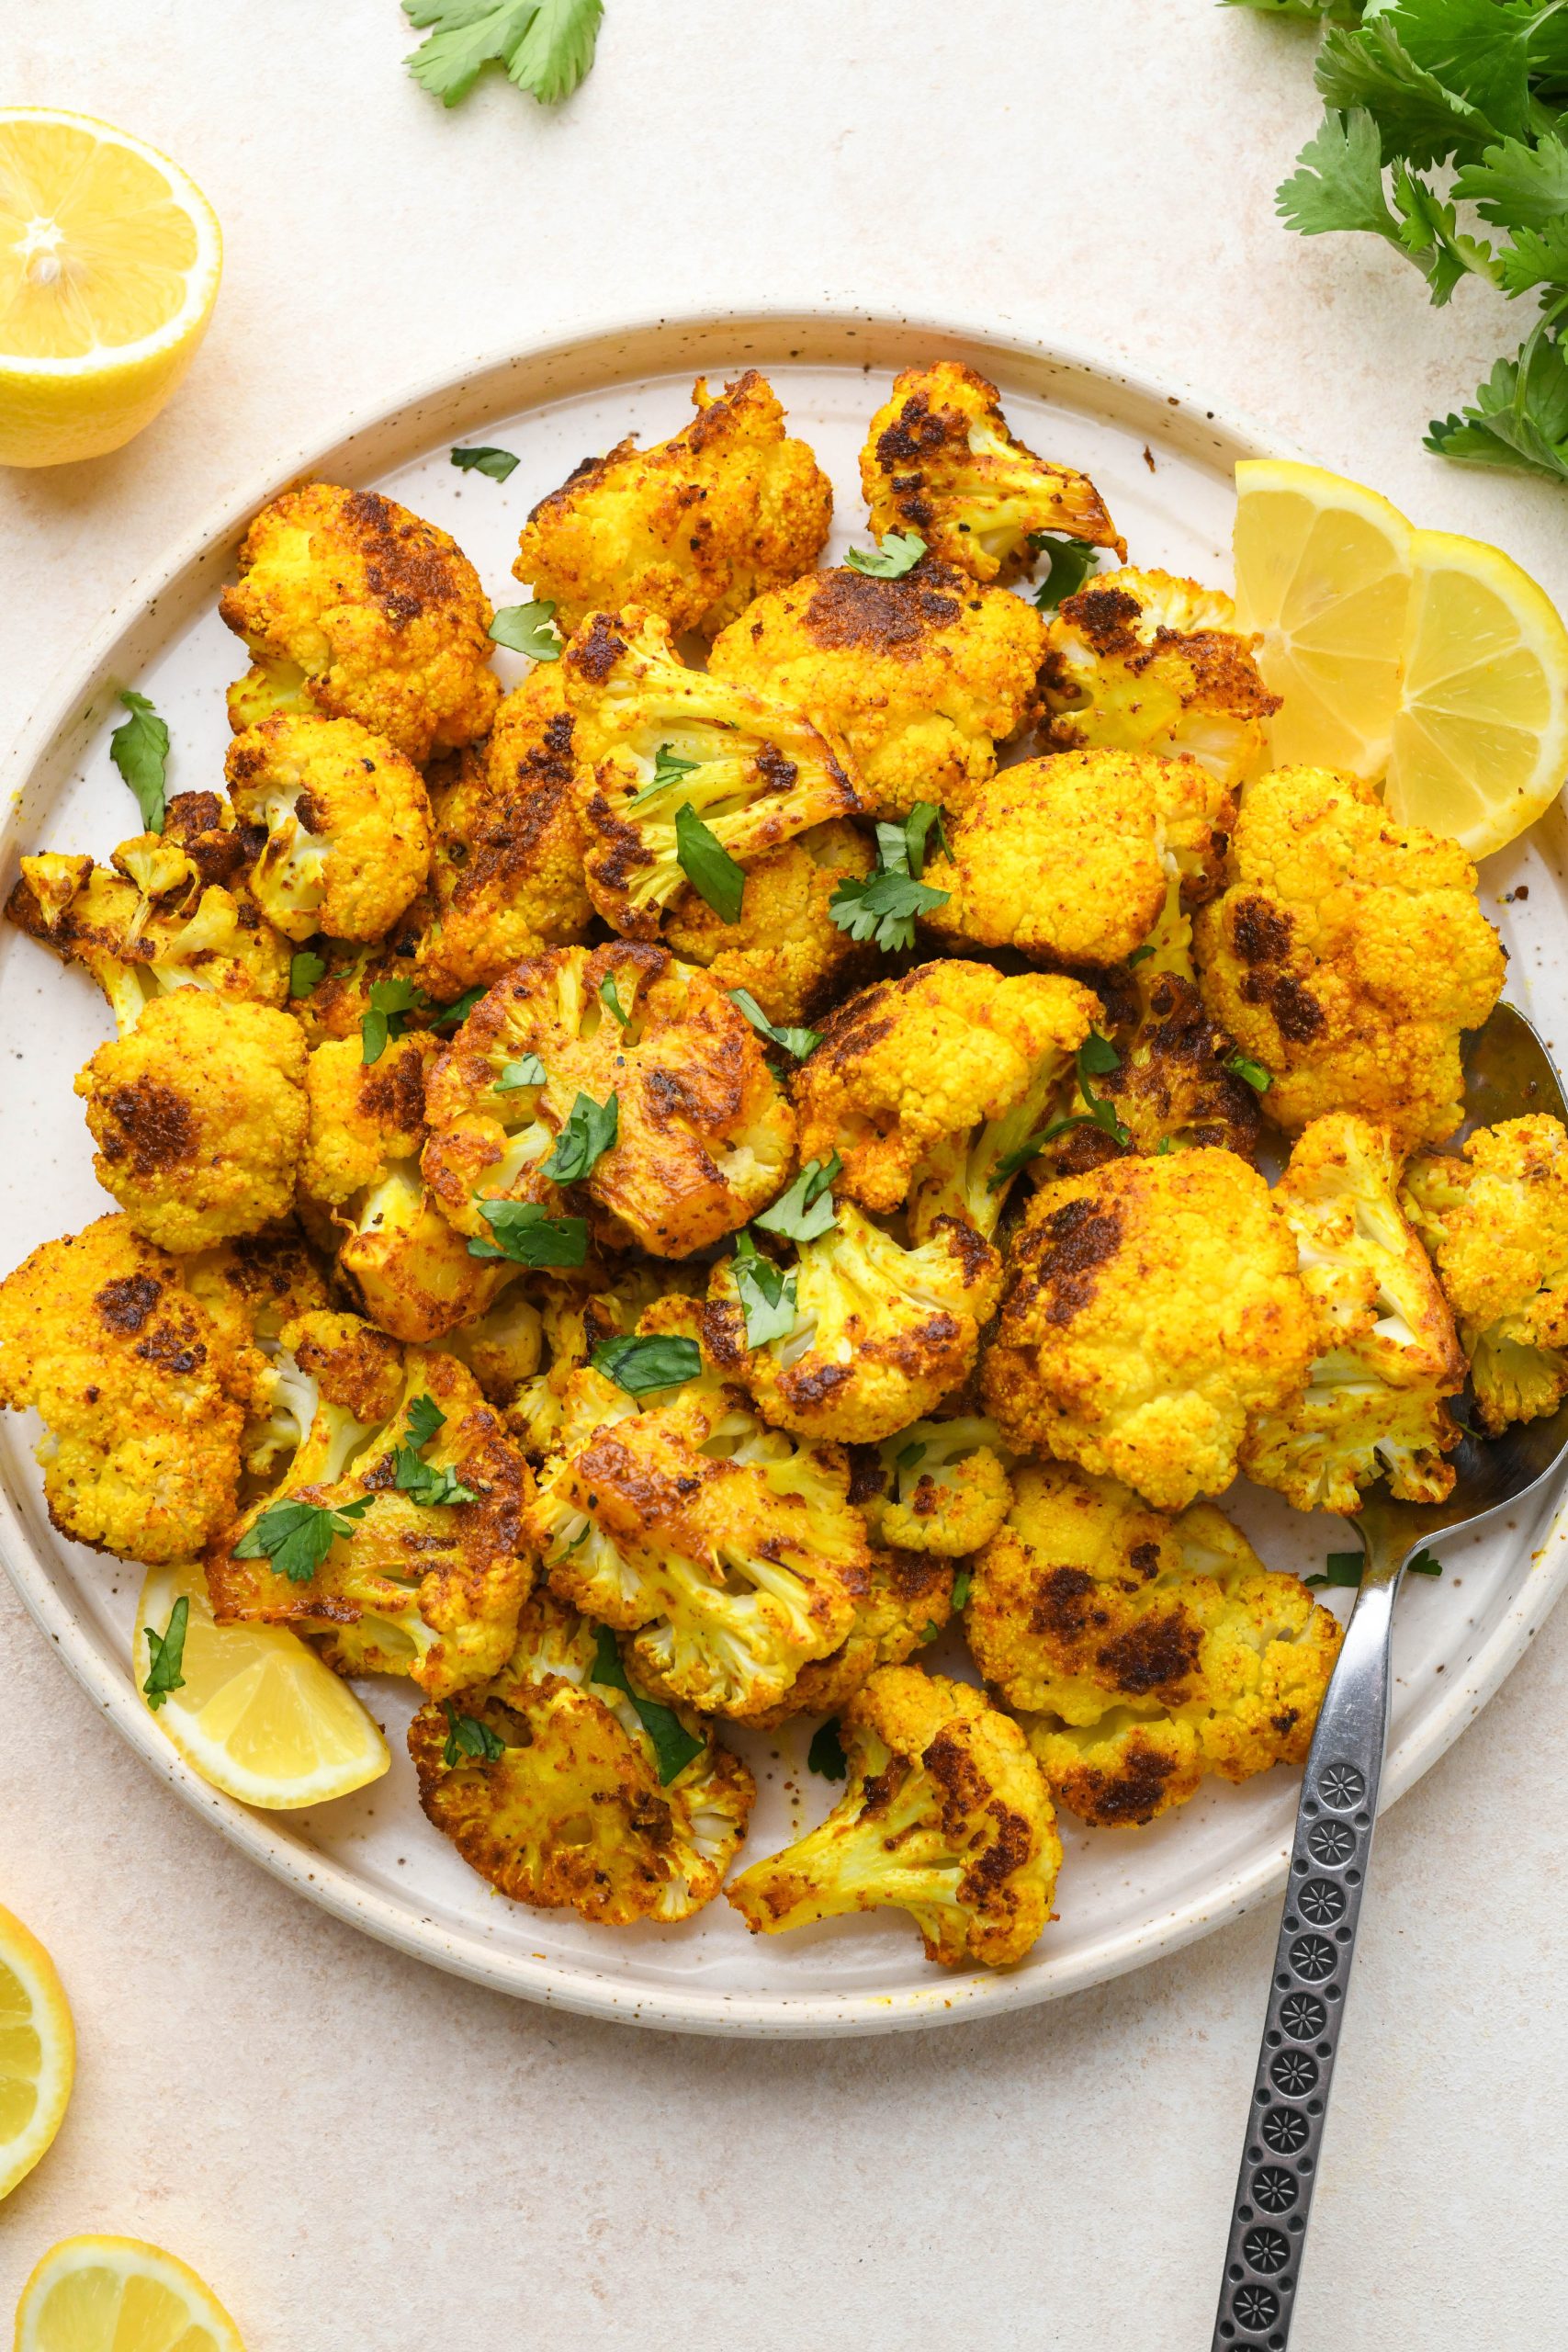 Turmeric roasted cauliflower on a speckled ceramic plate topped with fresh herbs.